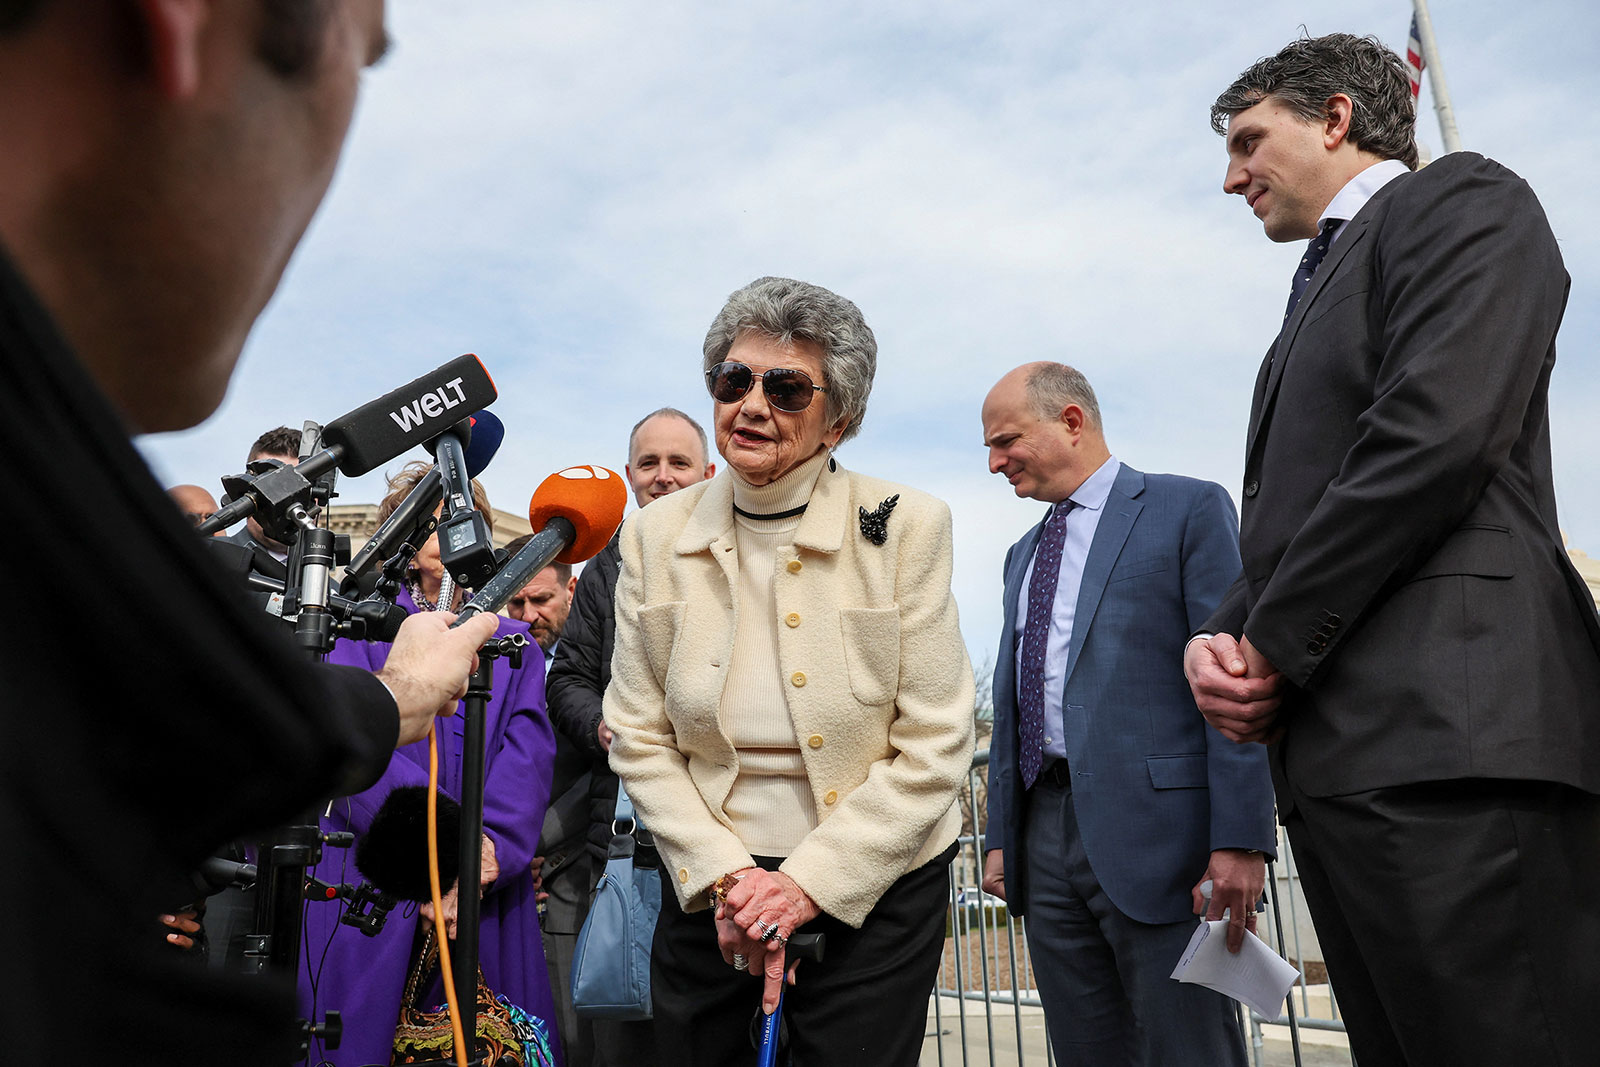 Norma Anderson speaks to reporters following Supreme Court oral arguments in Washington, DC, on Thursday.